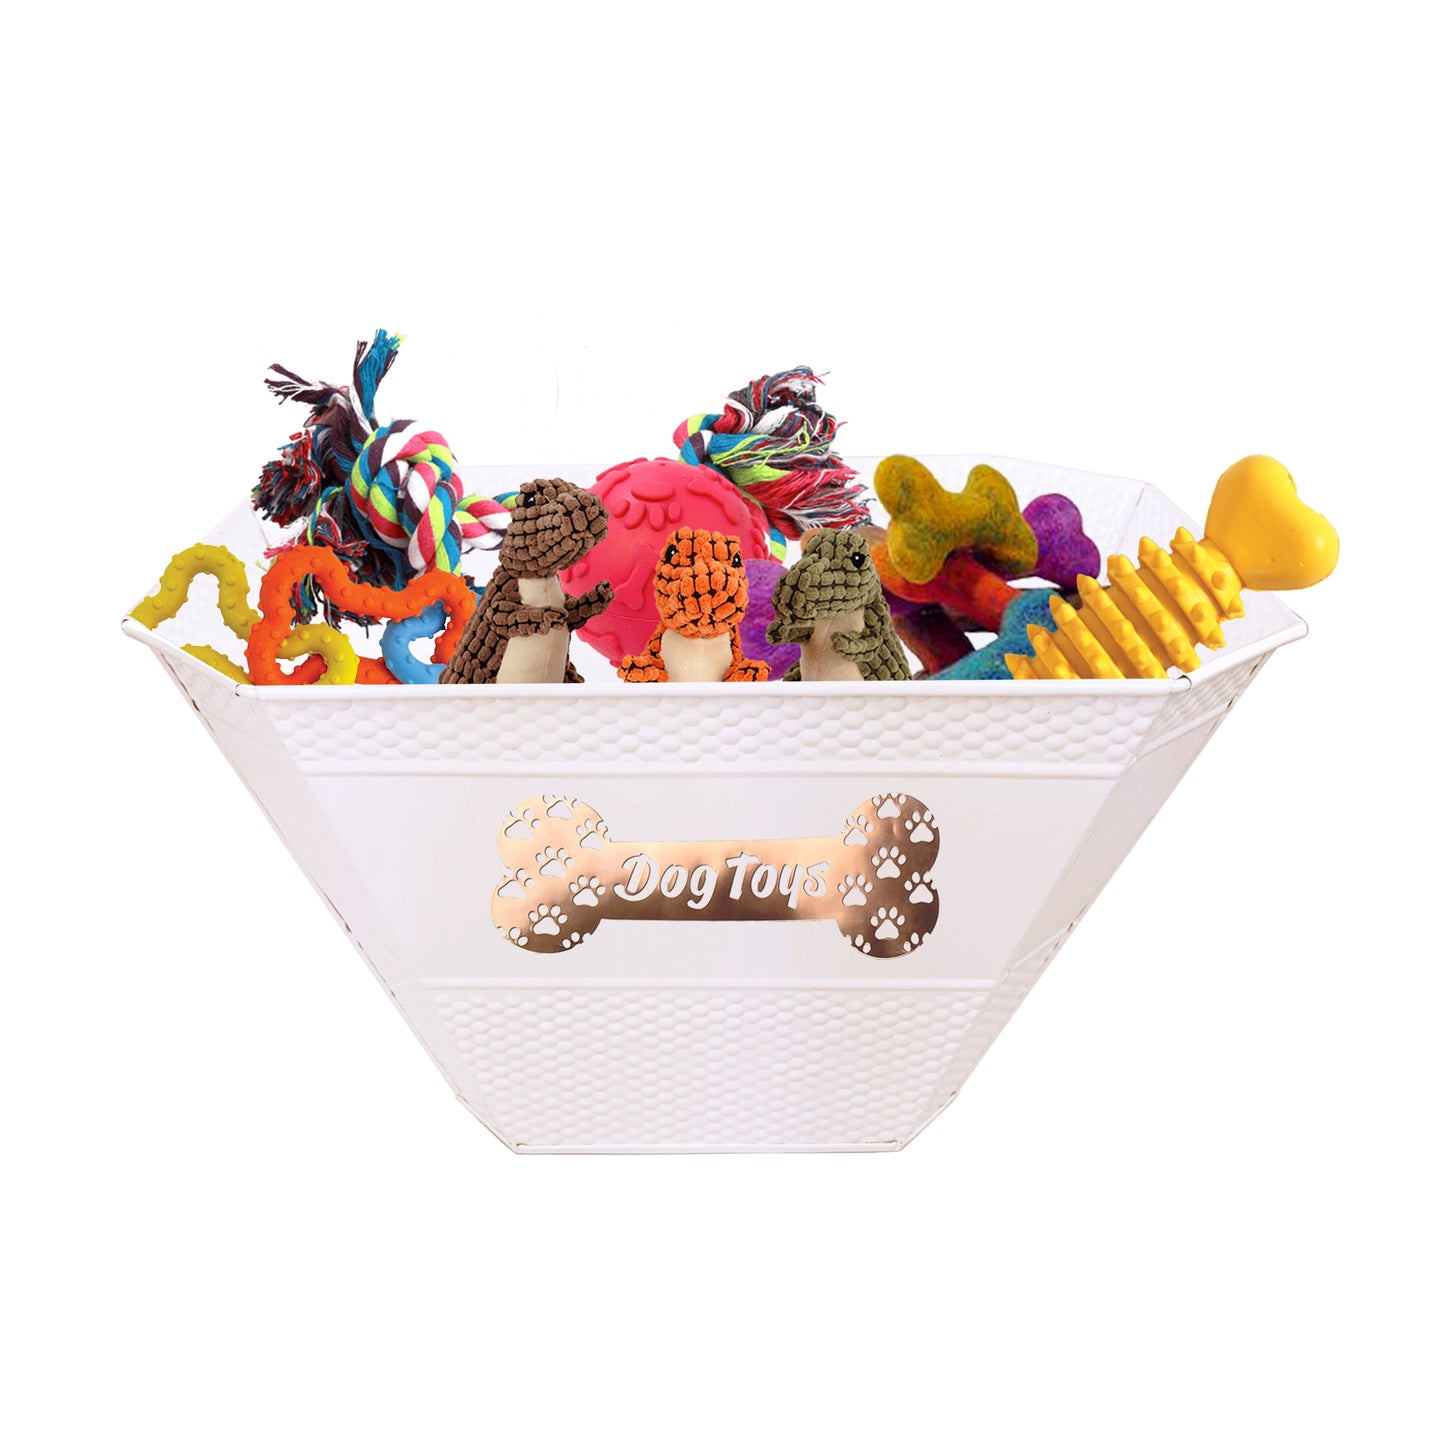 White dog toy bin, basket, or box to store dog toys, balls, ropes, and bones.  Small compact size to easily set in the corner of a living room or bedroom.  Includes custom dog bone and pawprint decoration in rose gold color.